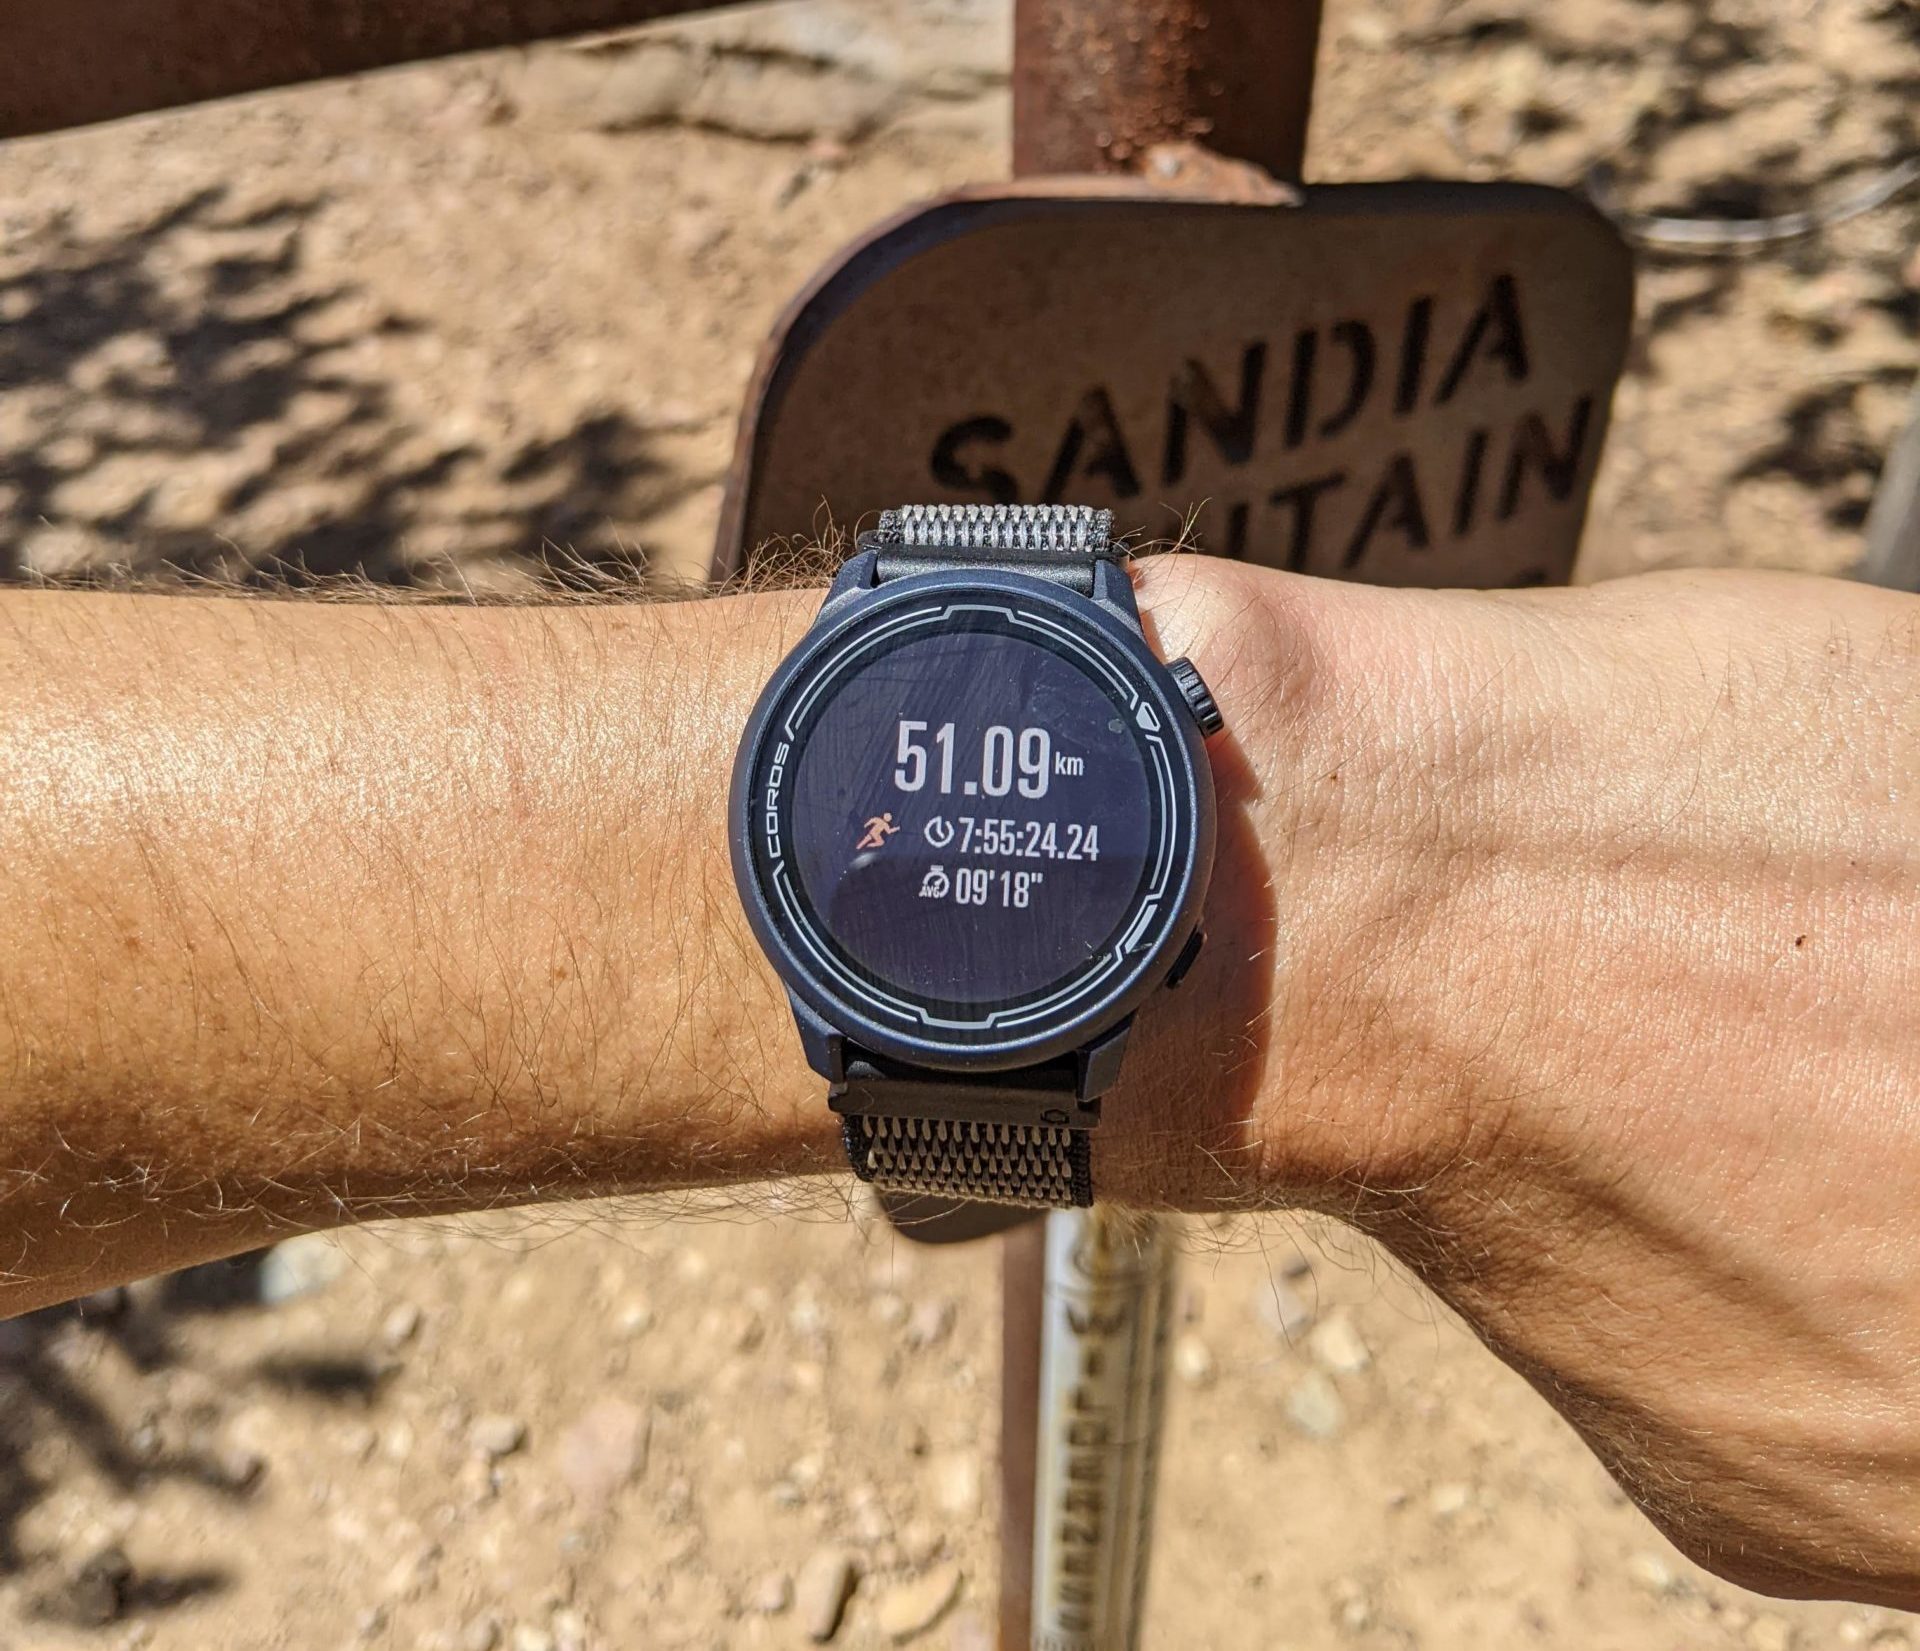 50km on the watch